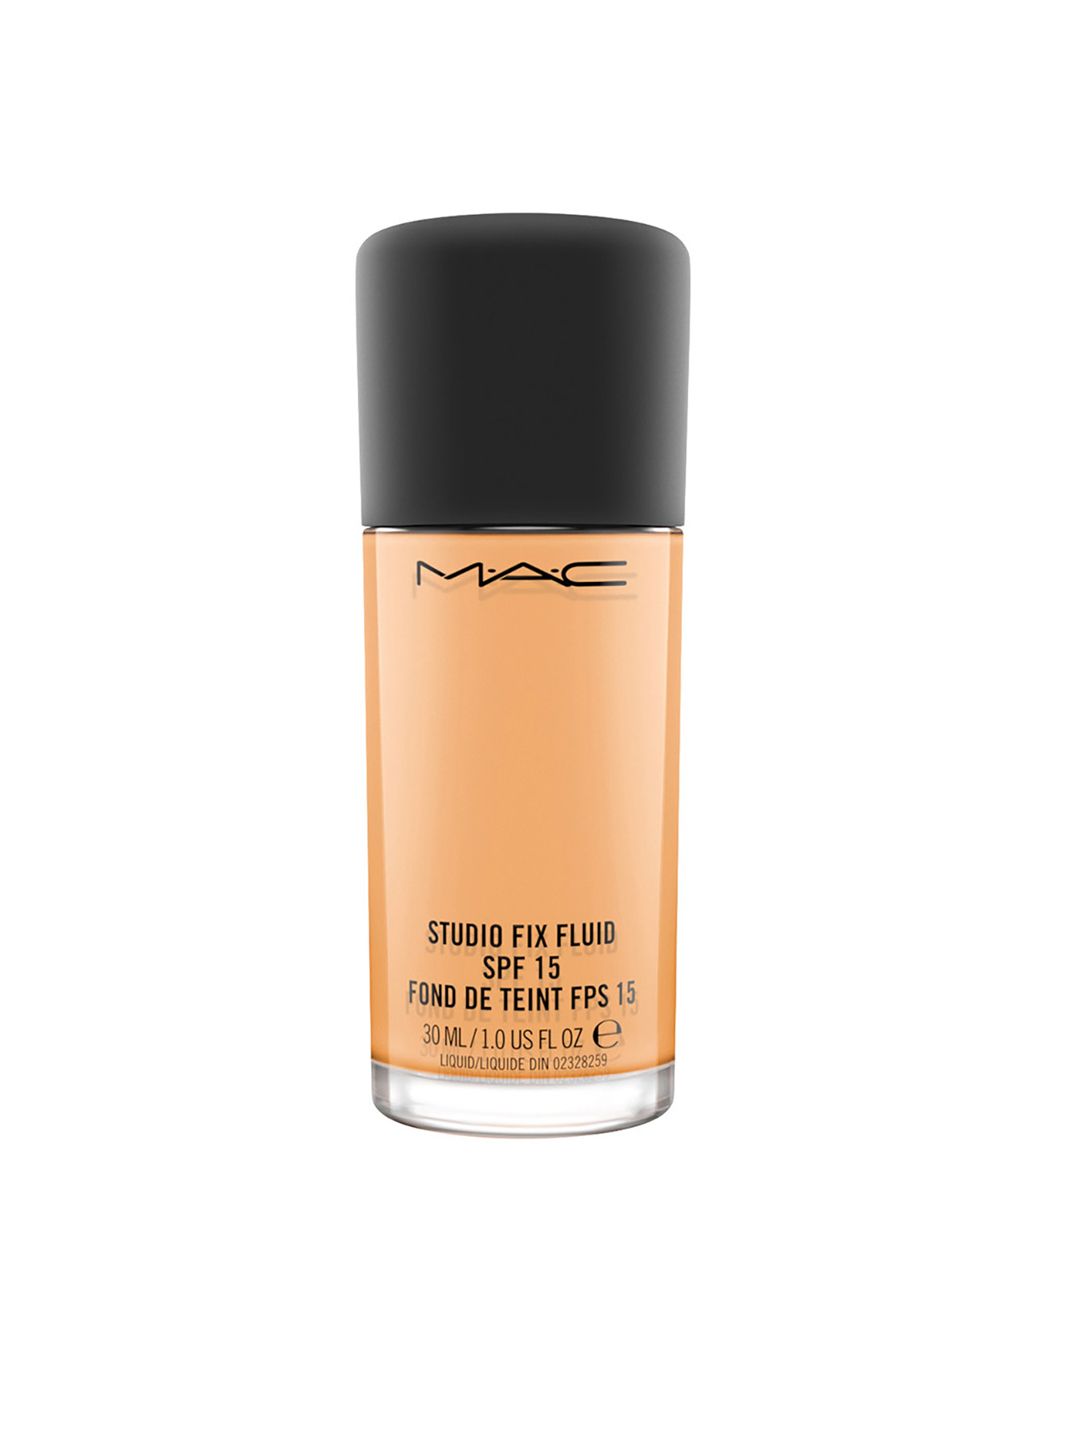 M.A.C Studio Fix Fluid Foundation with SPF 15 - NC43.5 30ml Price in India